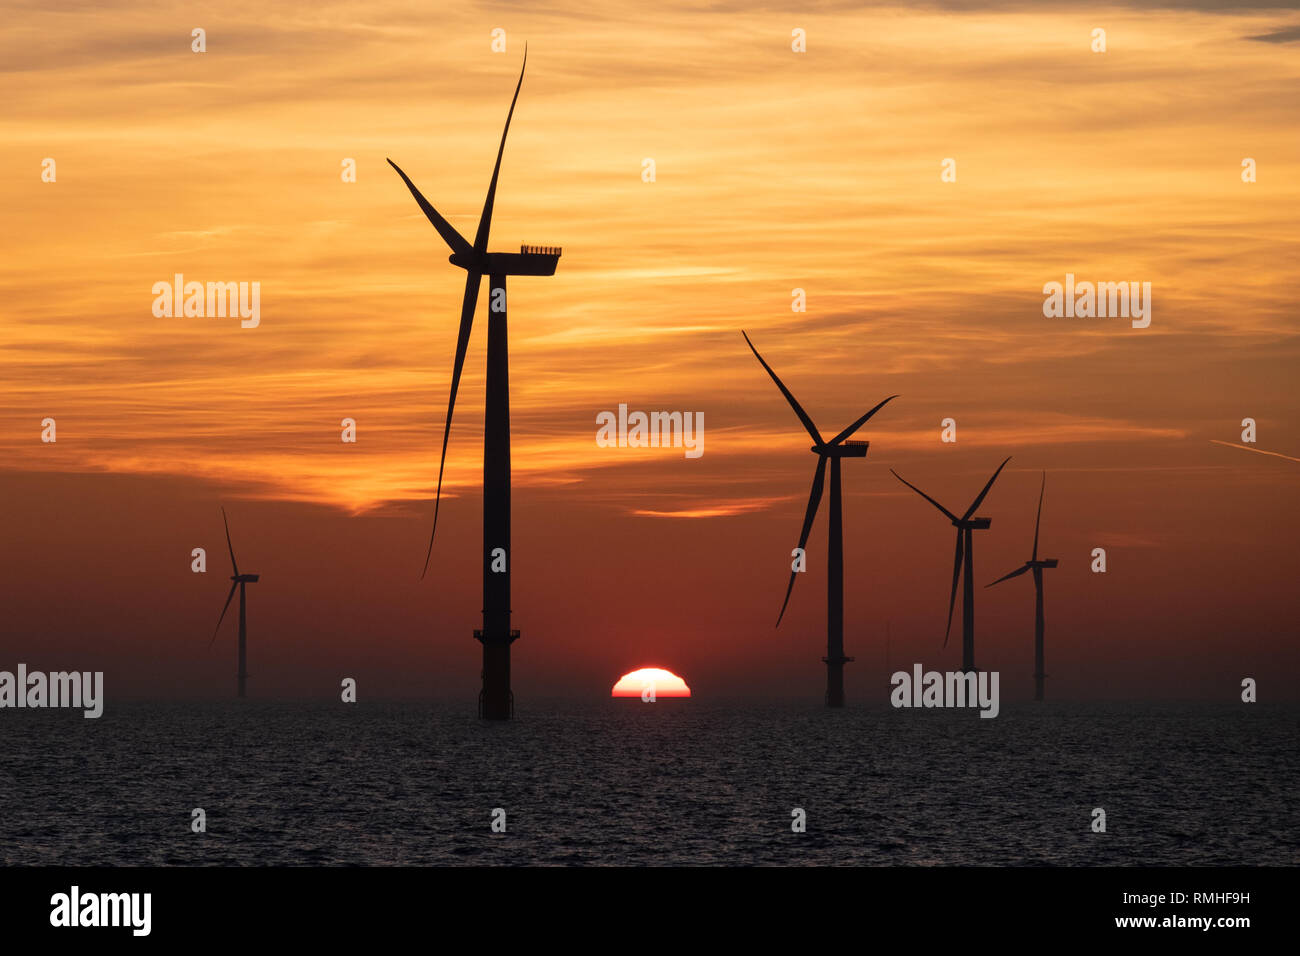 Wind turbines on the London Array Offshore Wind Farm in the Outer Thames Estuary during sunset Stock Photo